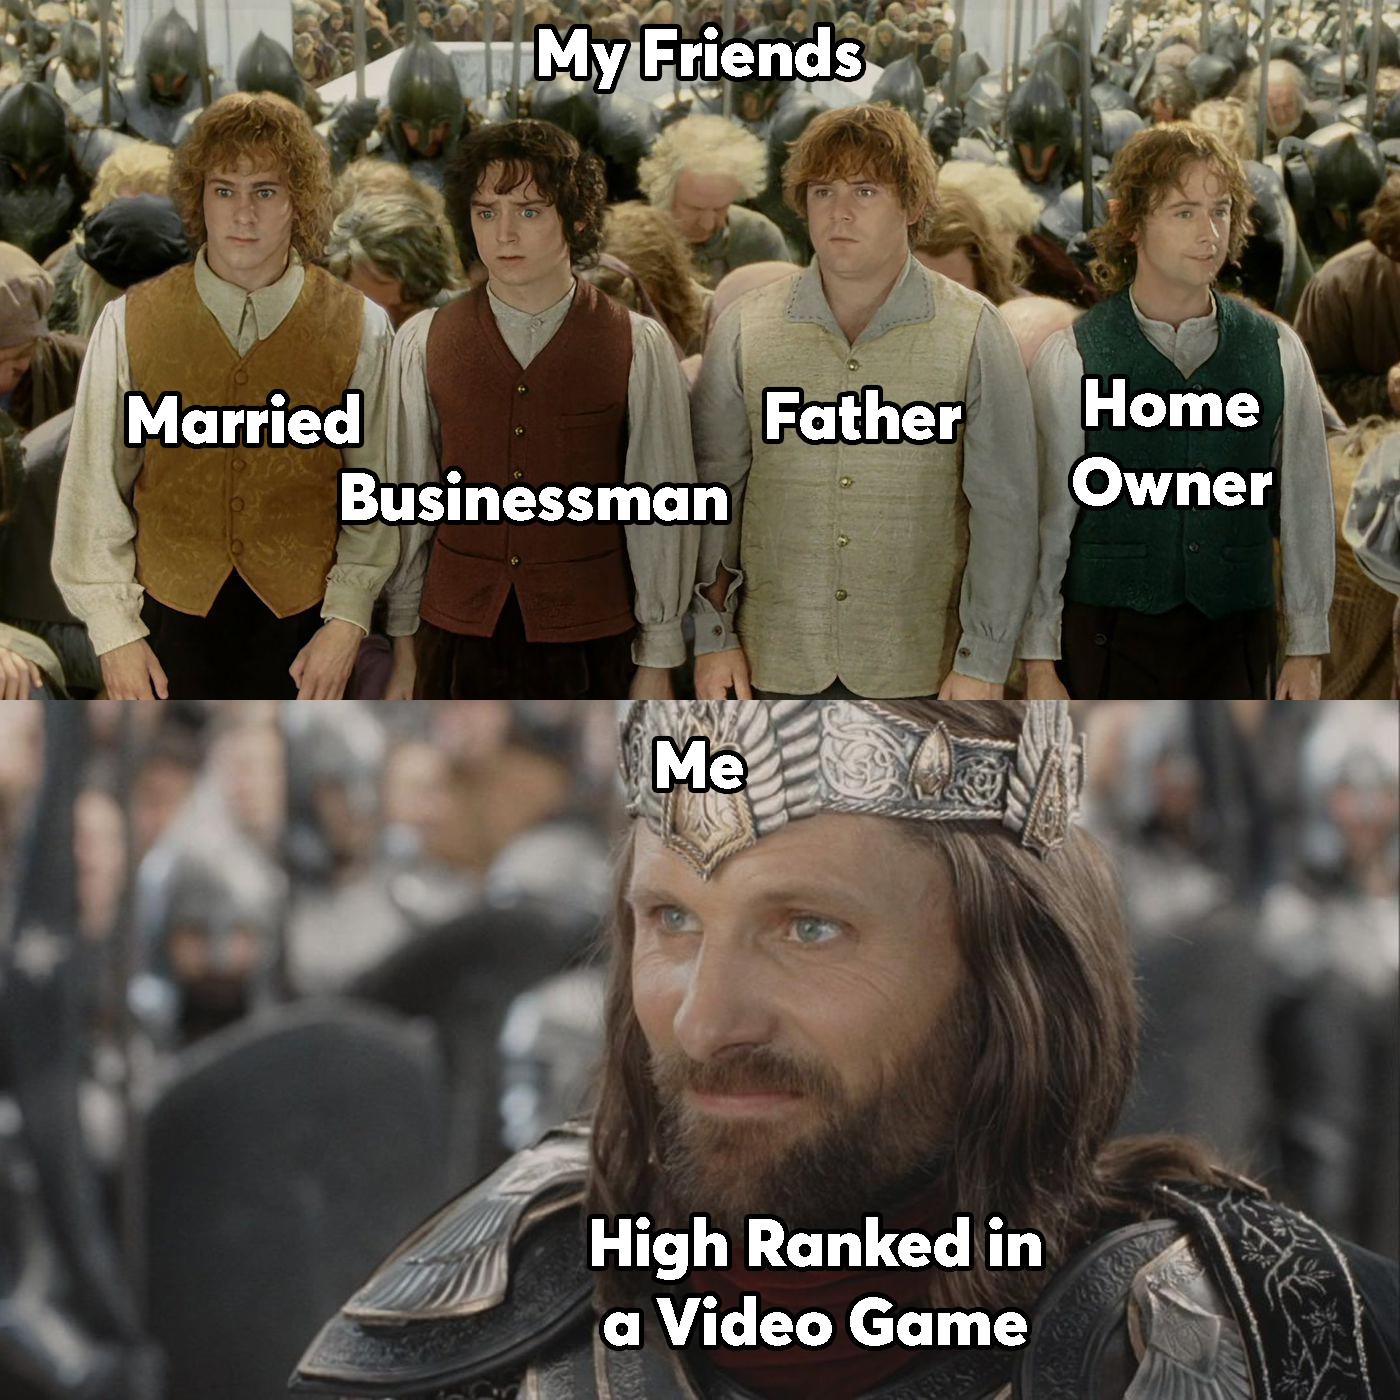 dank memes - lord of the rings hobbits - Married My Friends Father Businessman Me High Ranked in a Video Game Home Owner